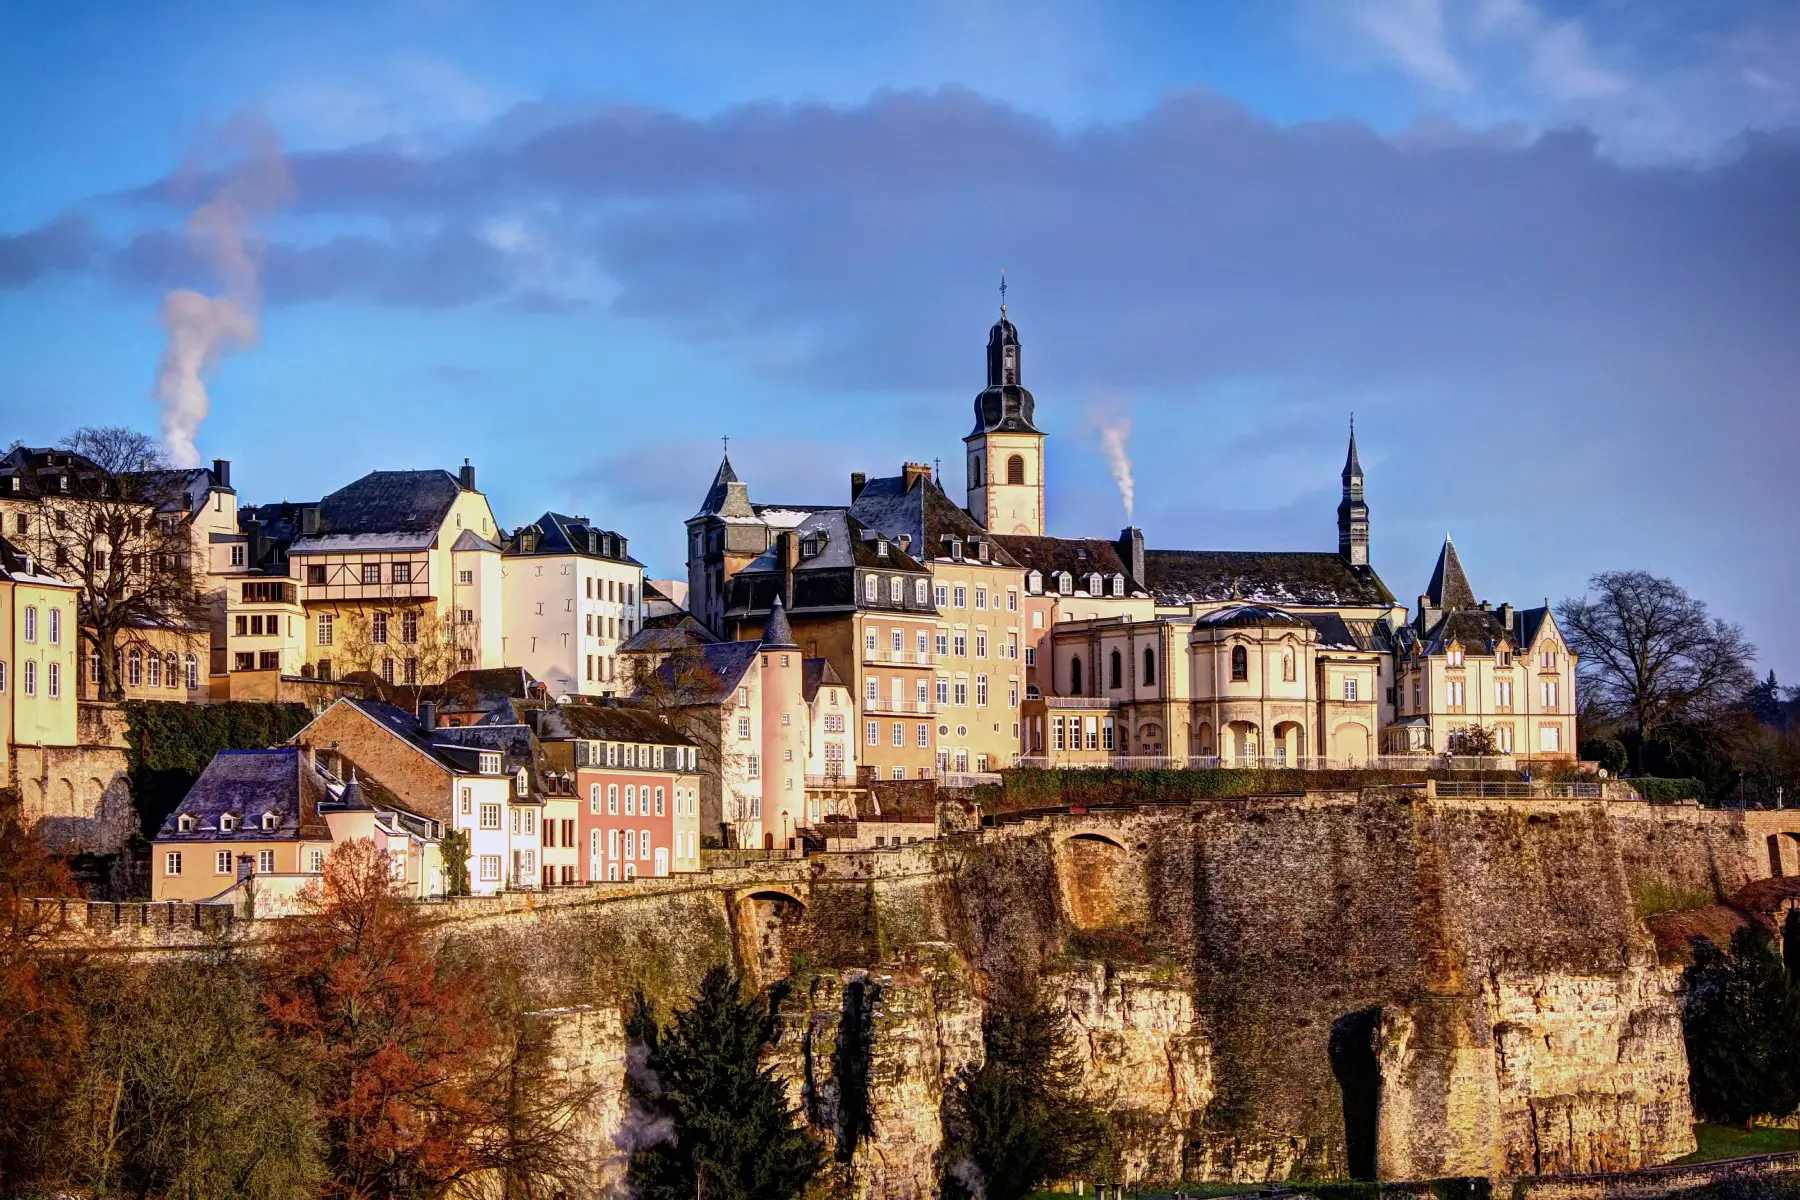 The Luxembourg City skyline with rooftops and St Michael church in the background